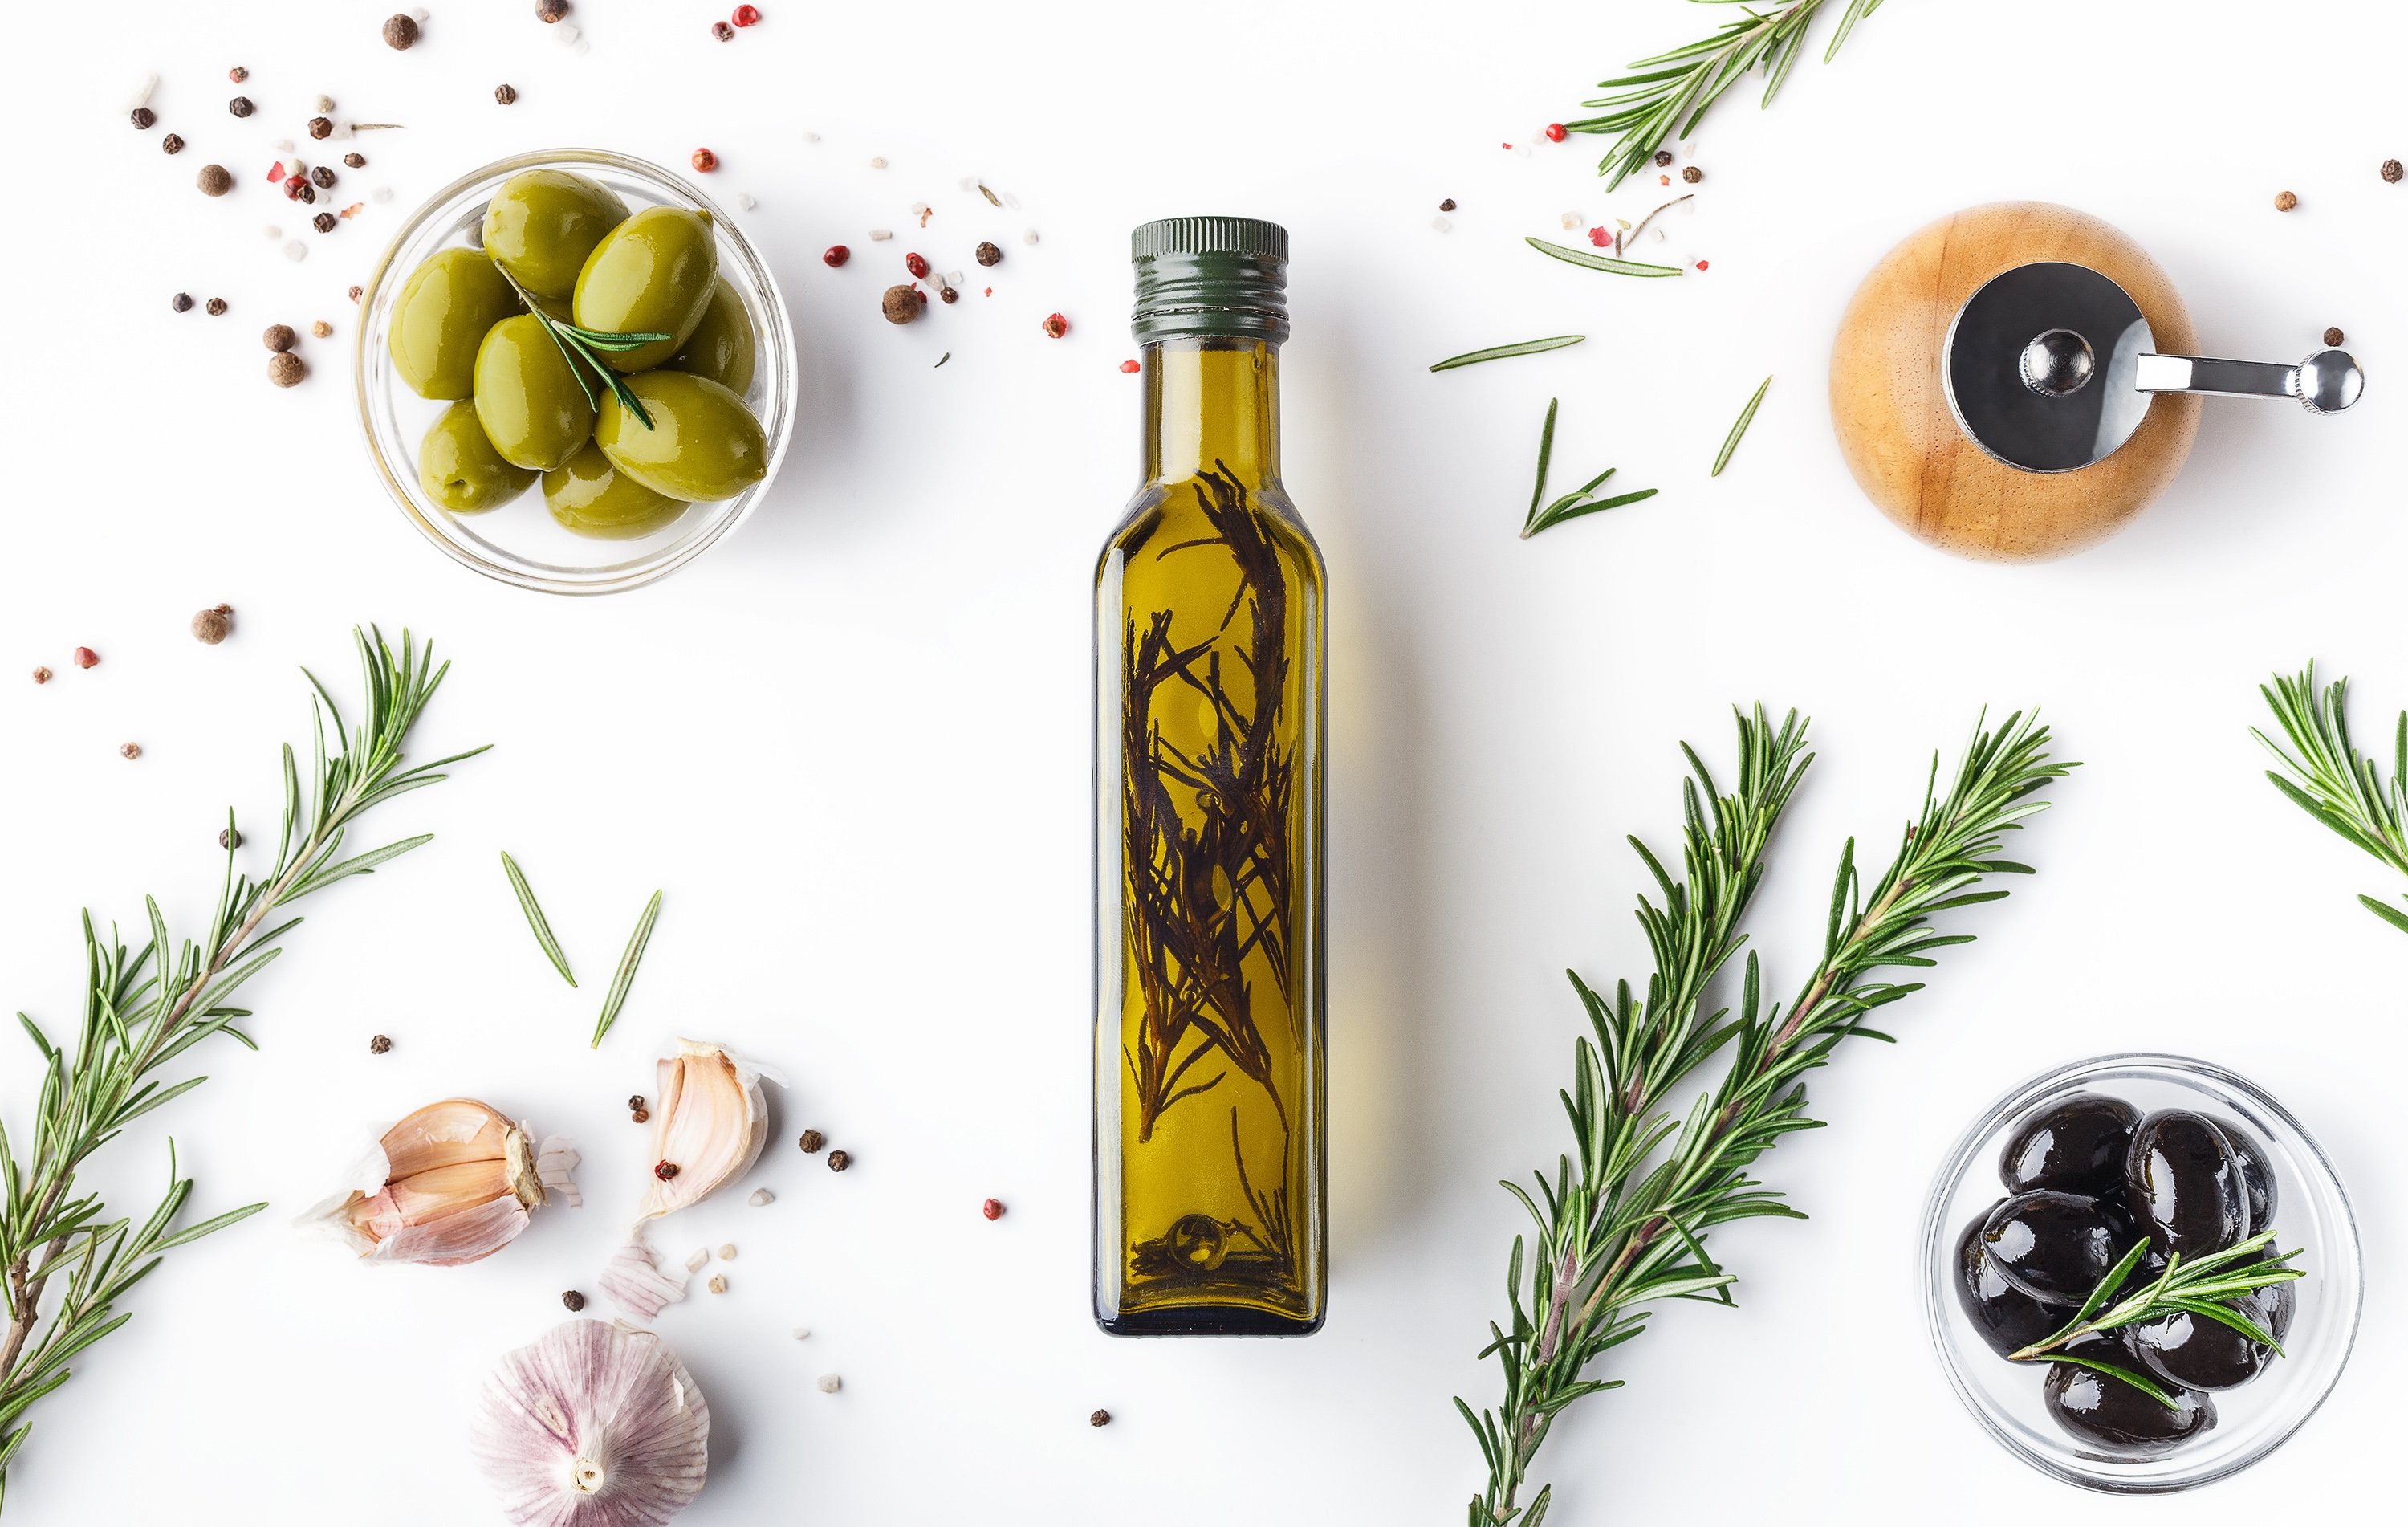 Olive oil is used extensively in many Turkish dishes, especially in the Aegean. (Shutterstock Photo)